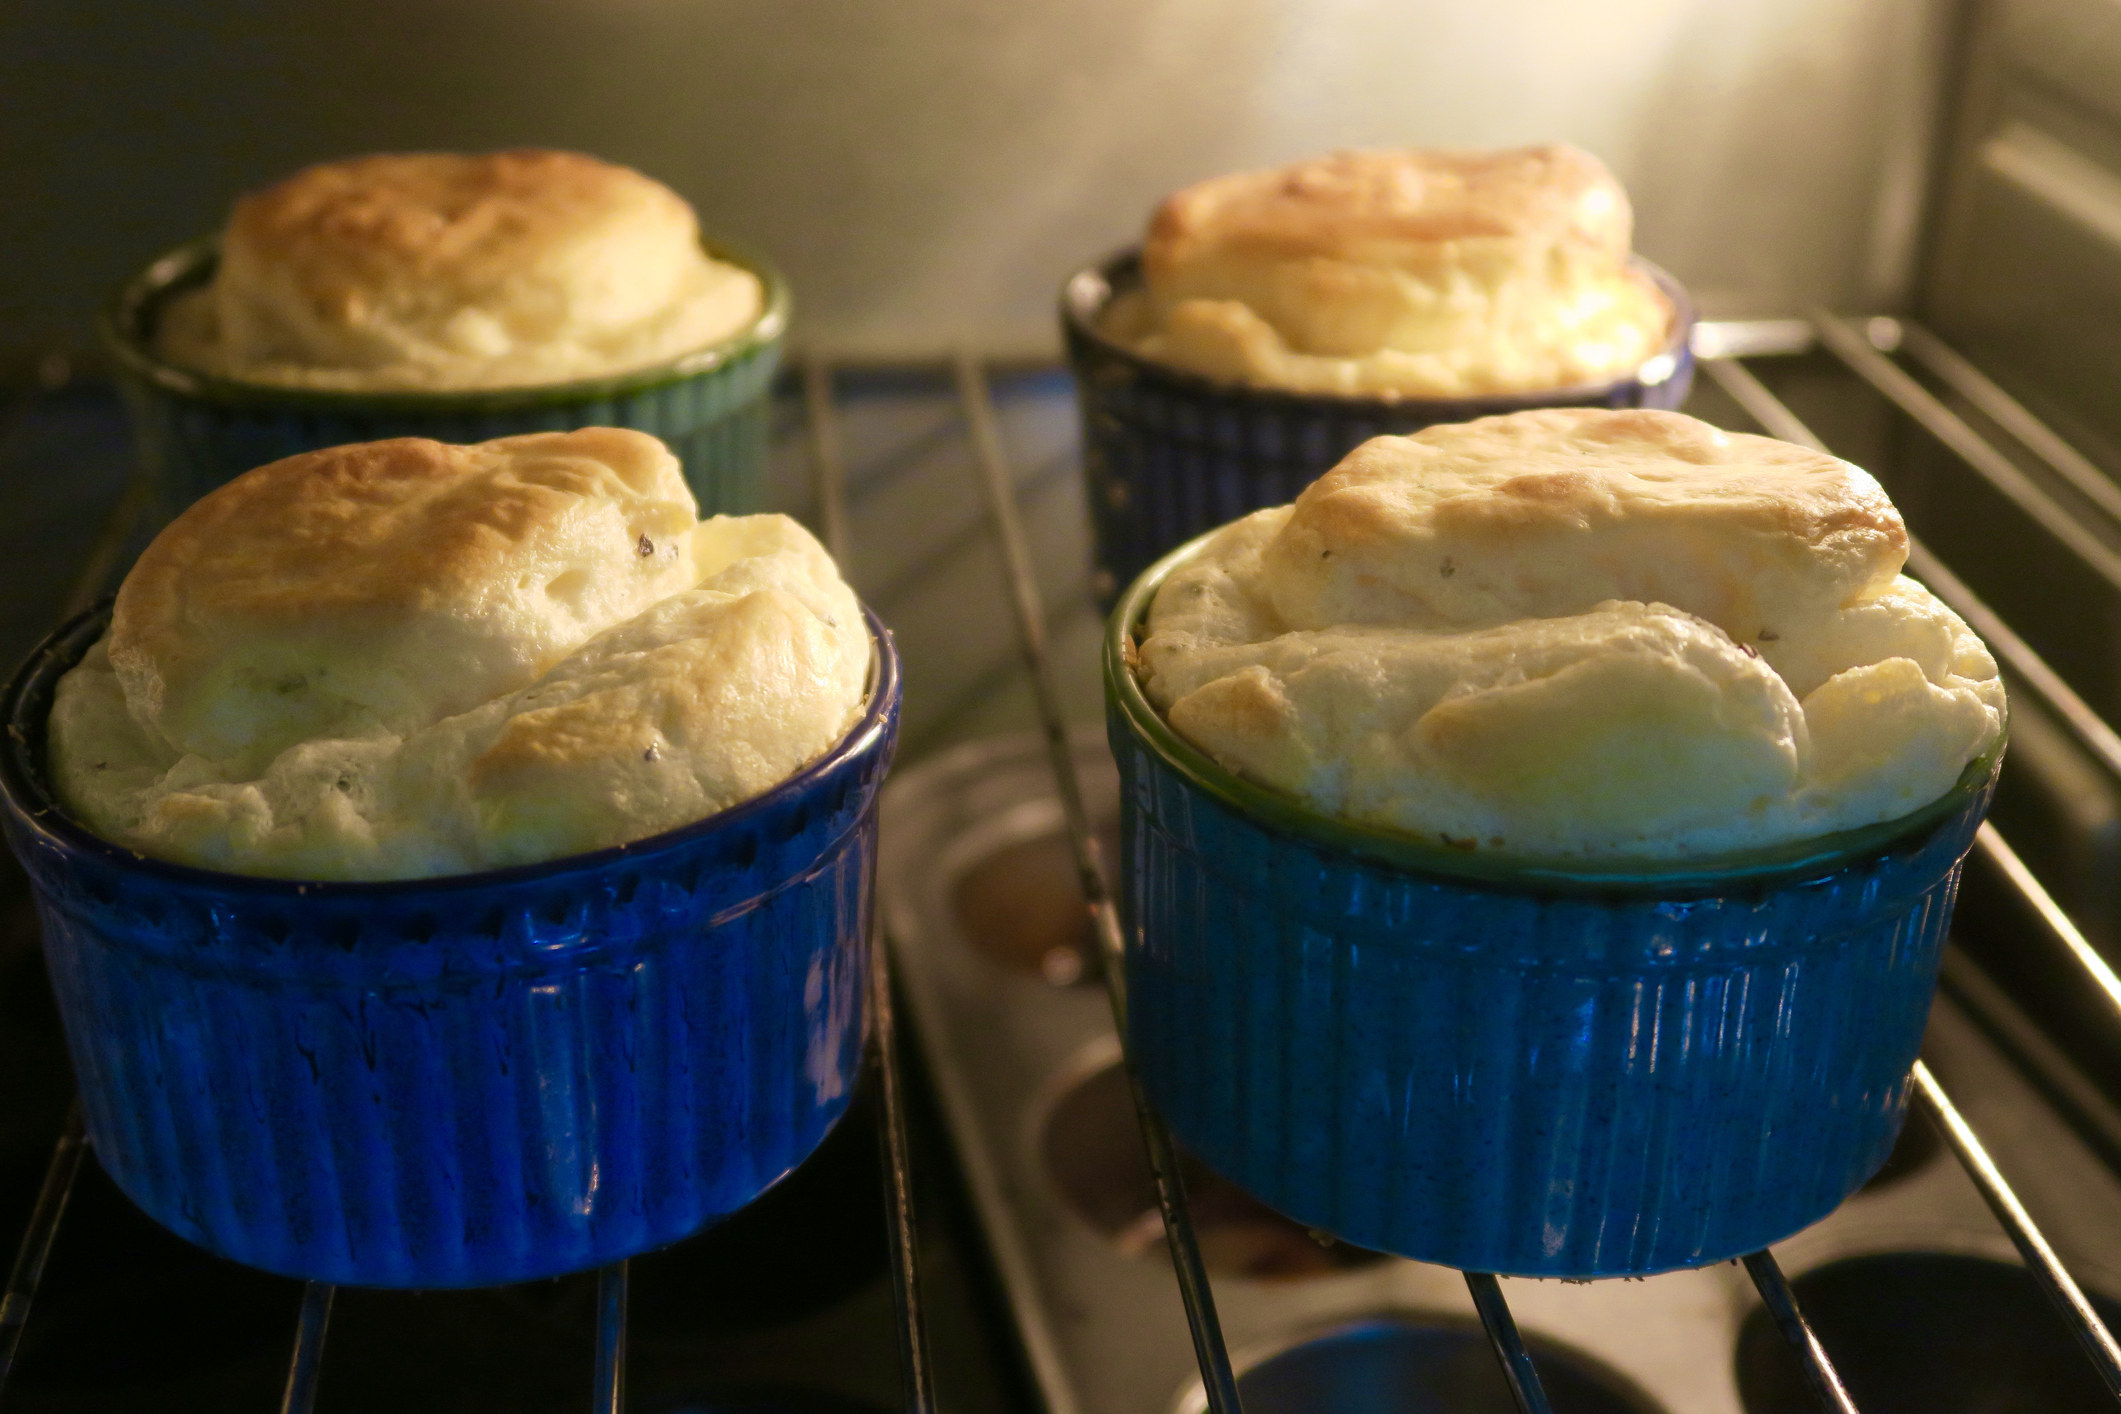 Soufflés in the oven.